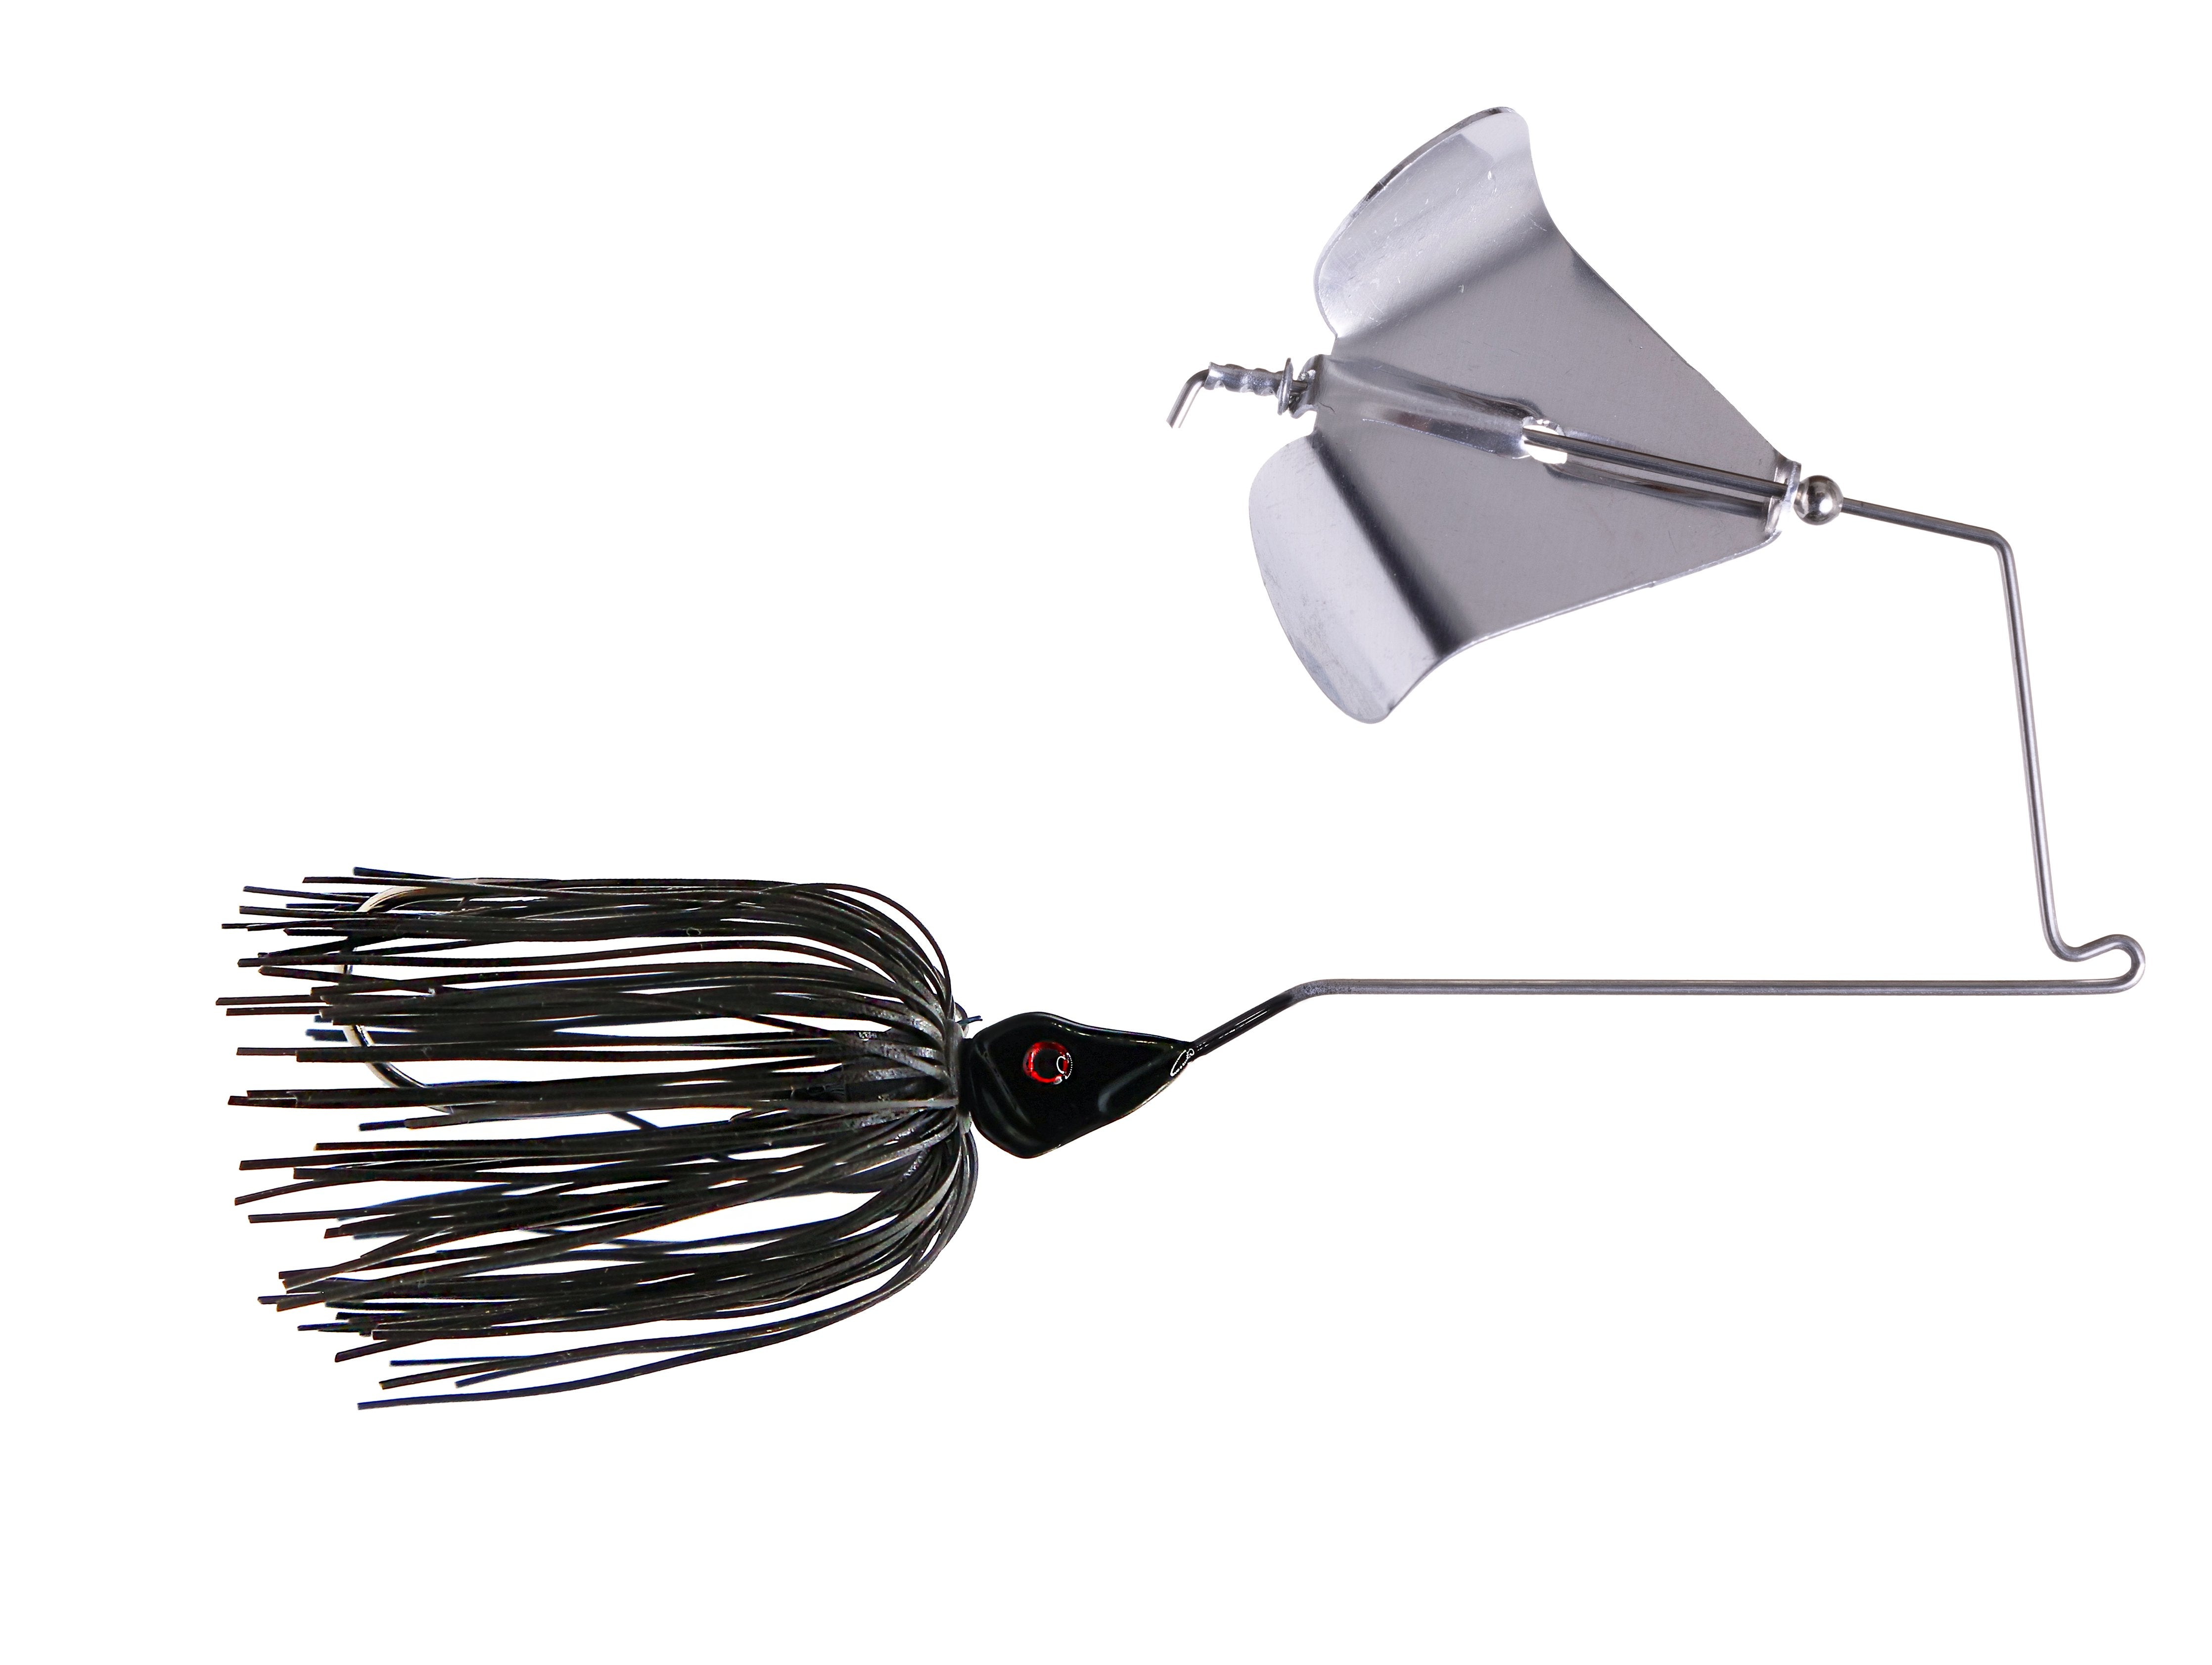 Evolution Baits Grass Burner Buzzbaits Quality And Evaluation Are